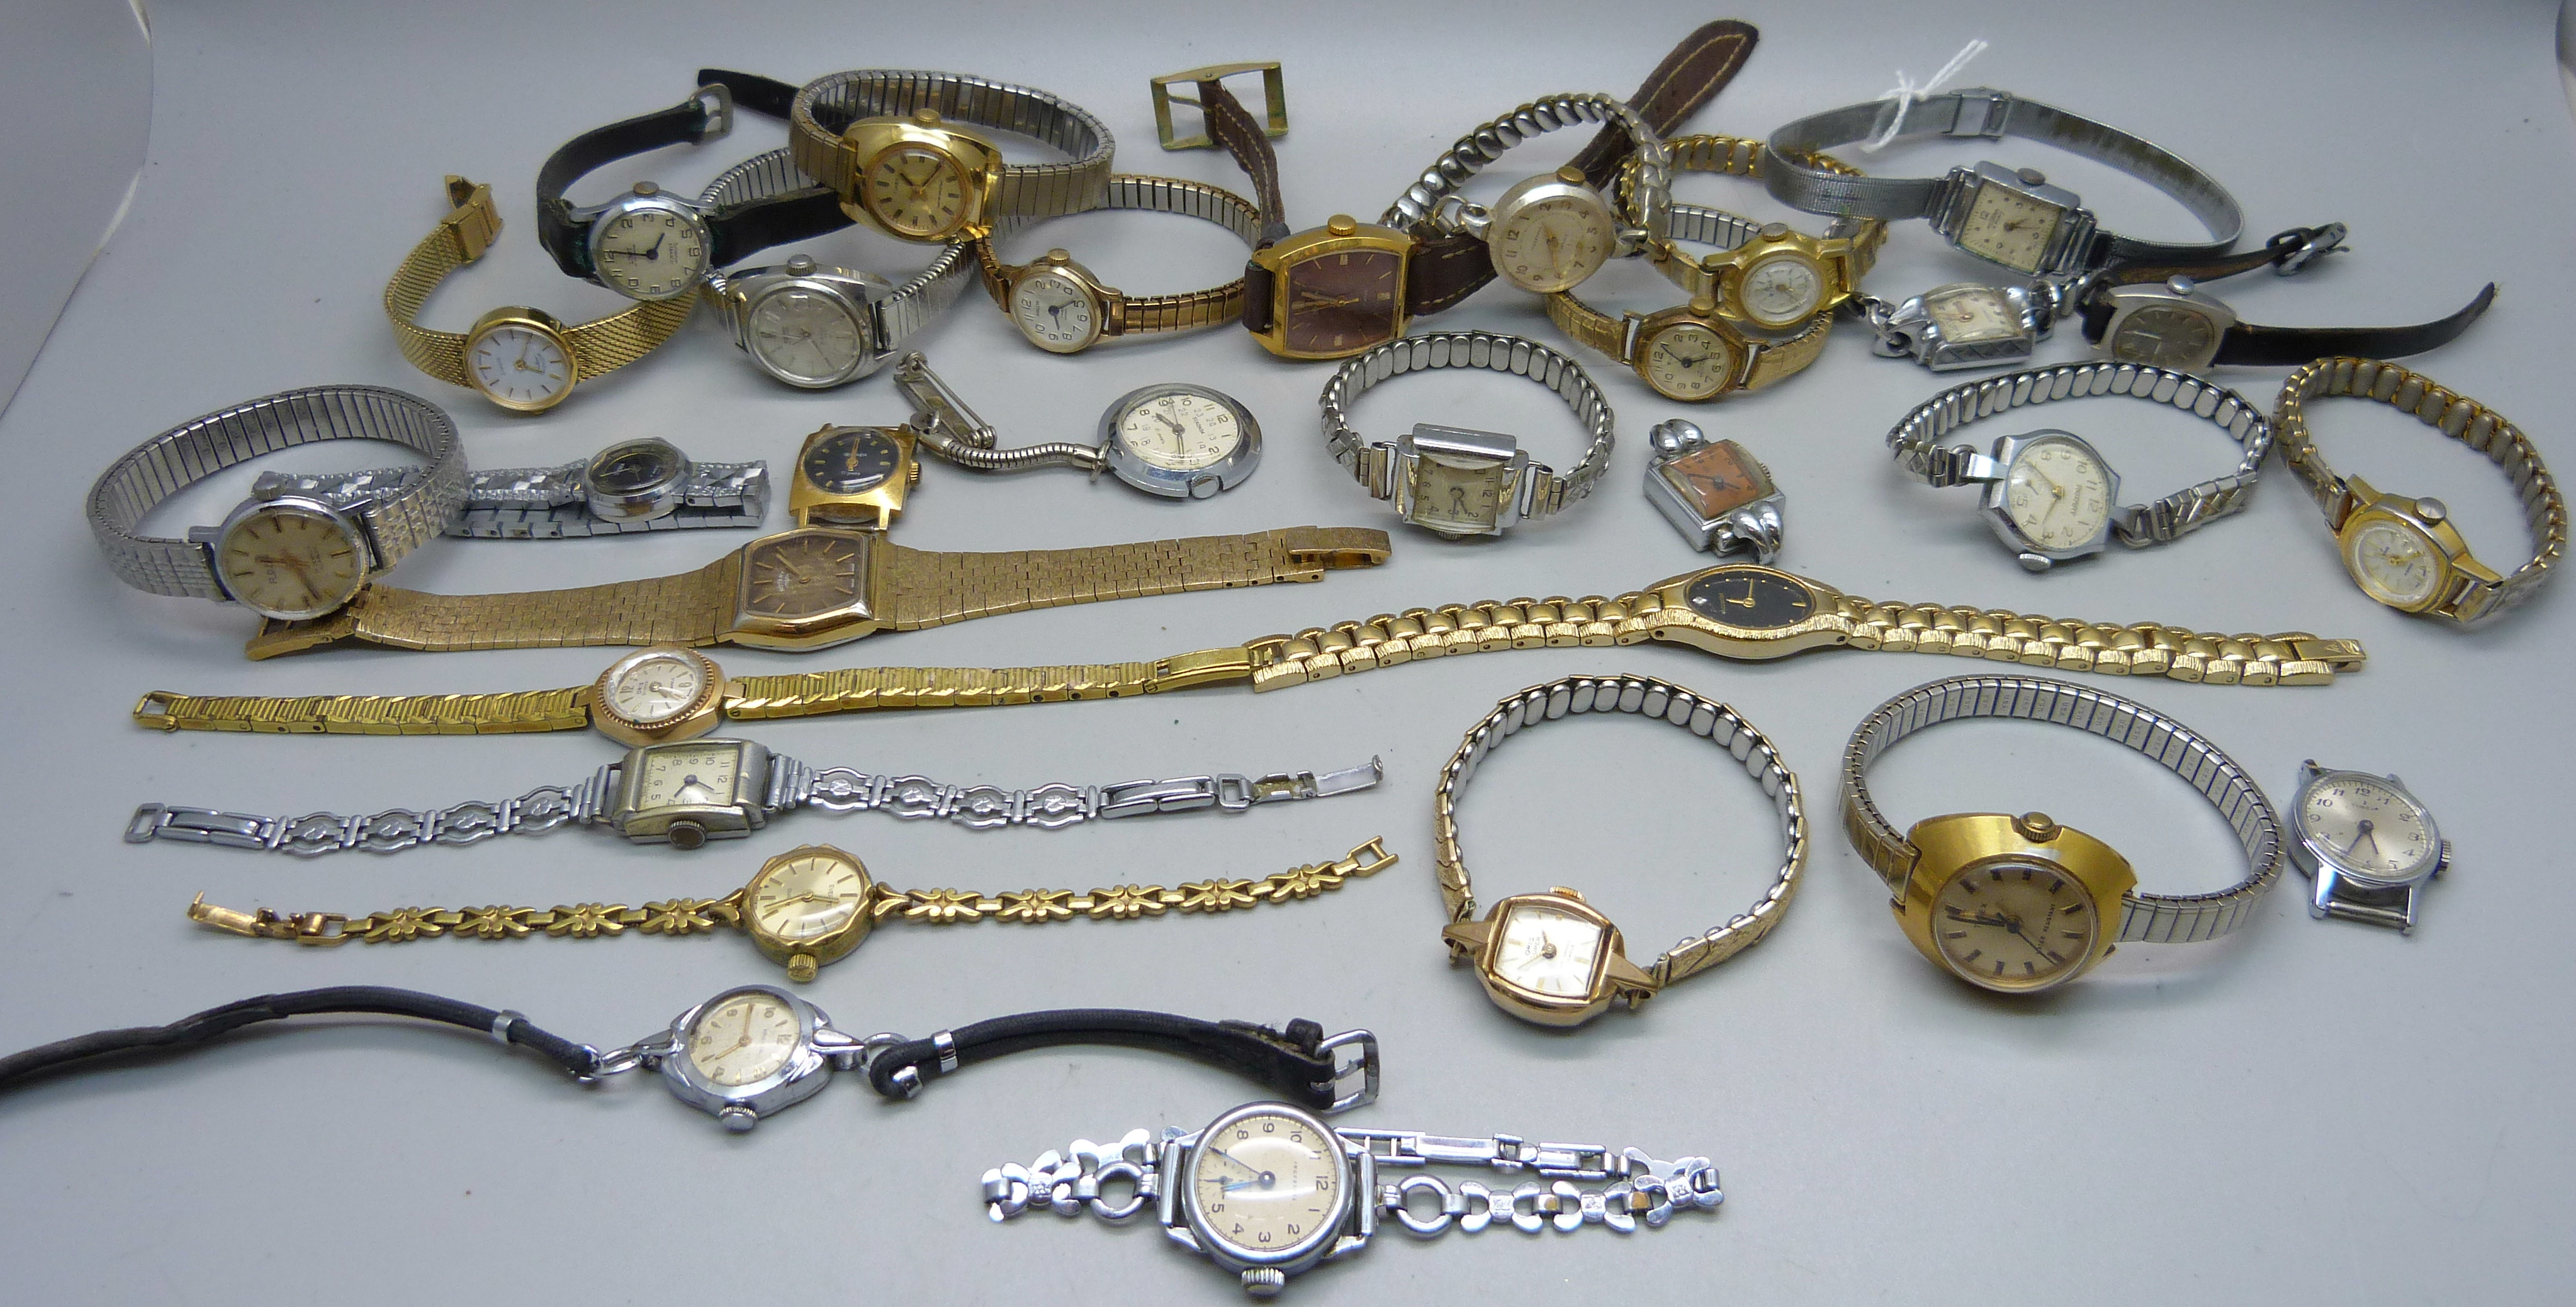 A collection of lady's wristwatches including Oris, Timex, Accurist, Sekonda, Rotary, etc.